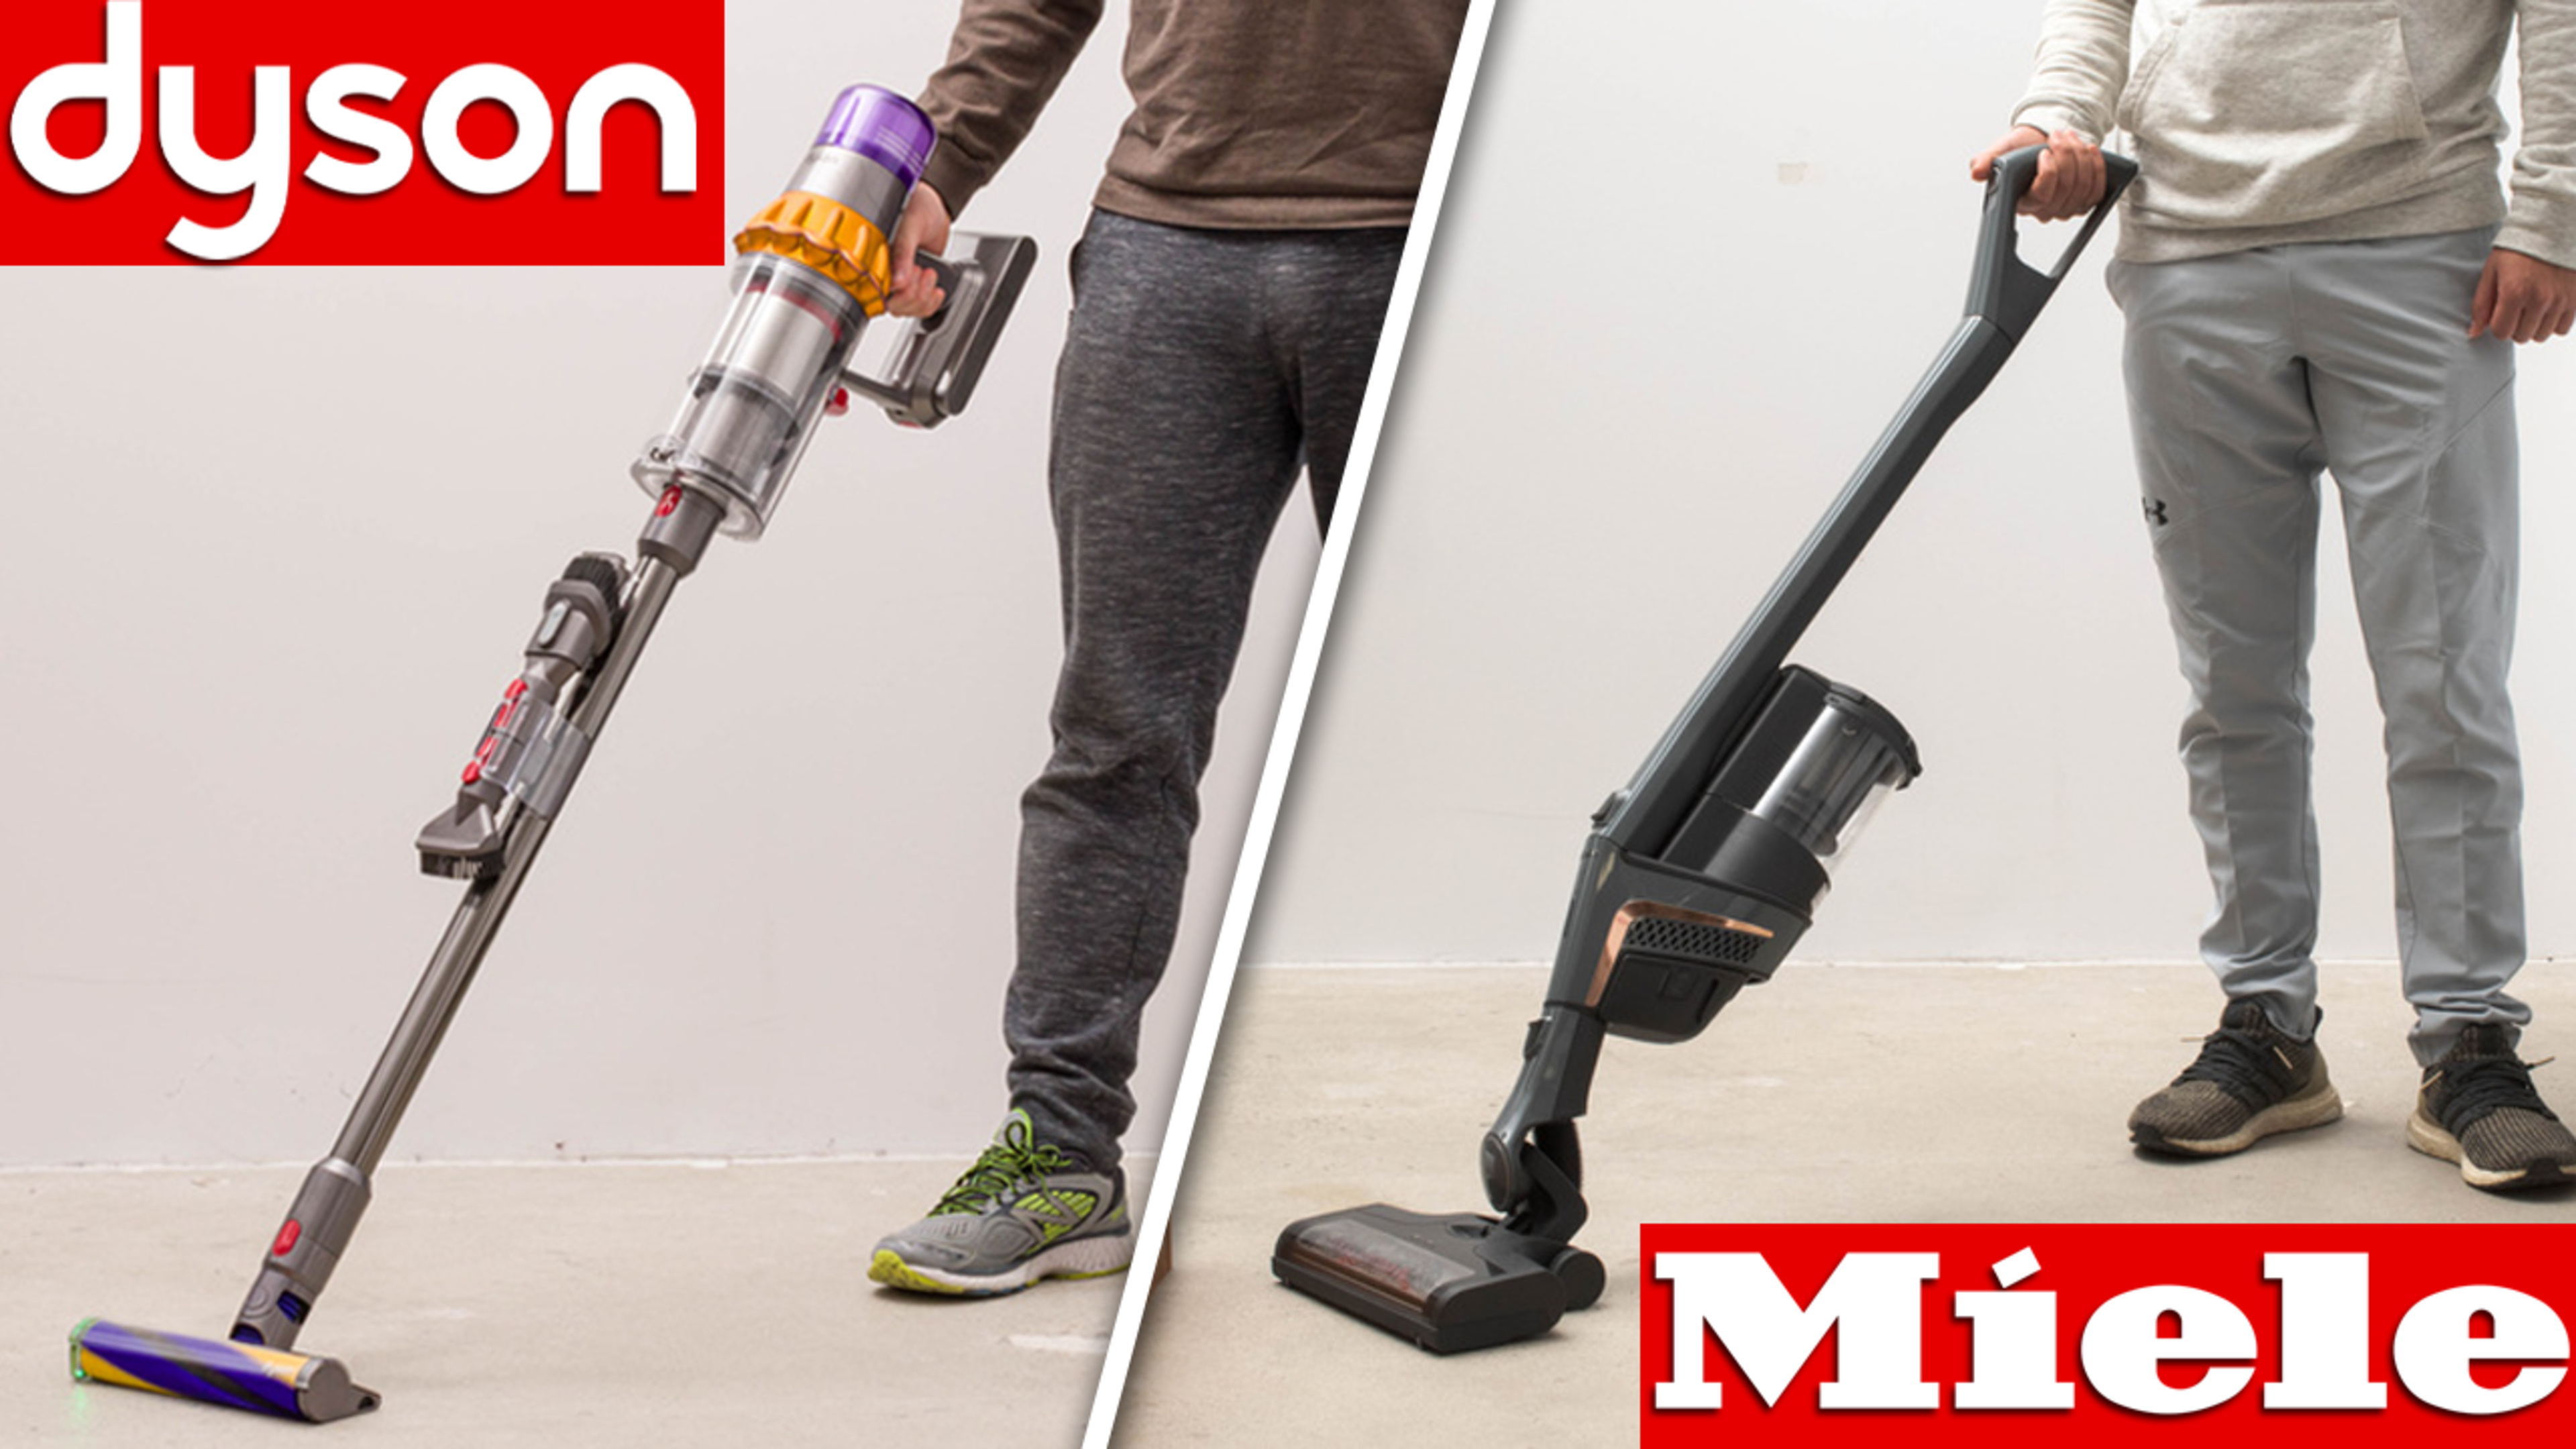 generelt Nægte glas Dyson vs Miele Vacuums: Bought, Tested, and Compared - RTINGS.com